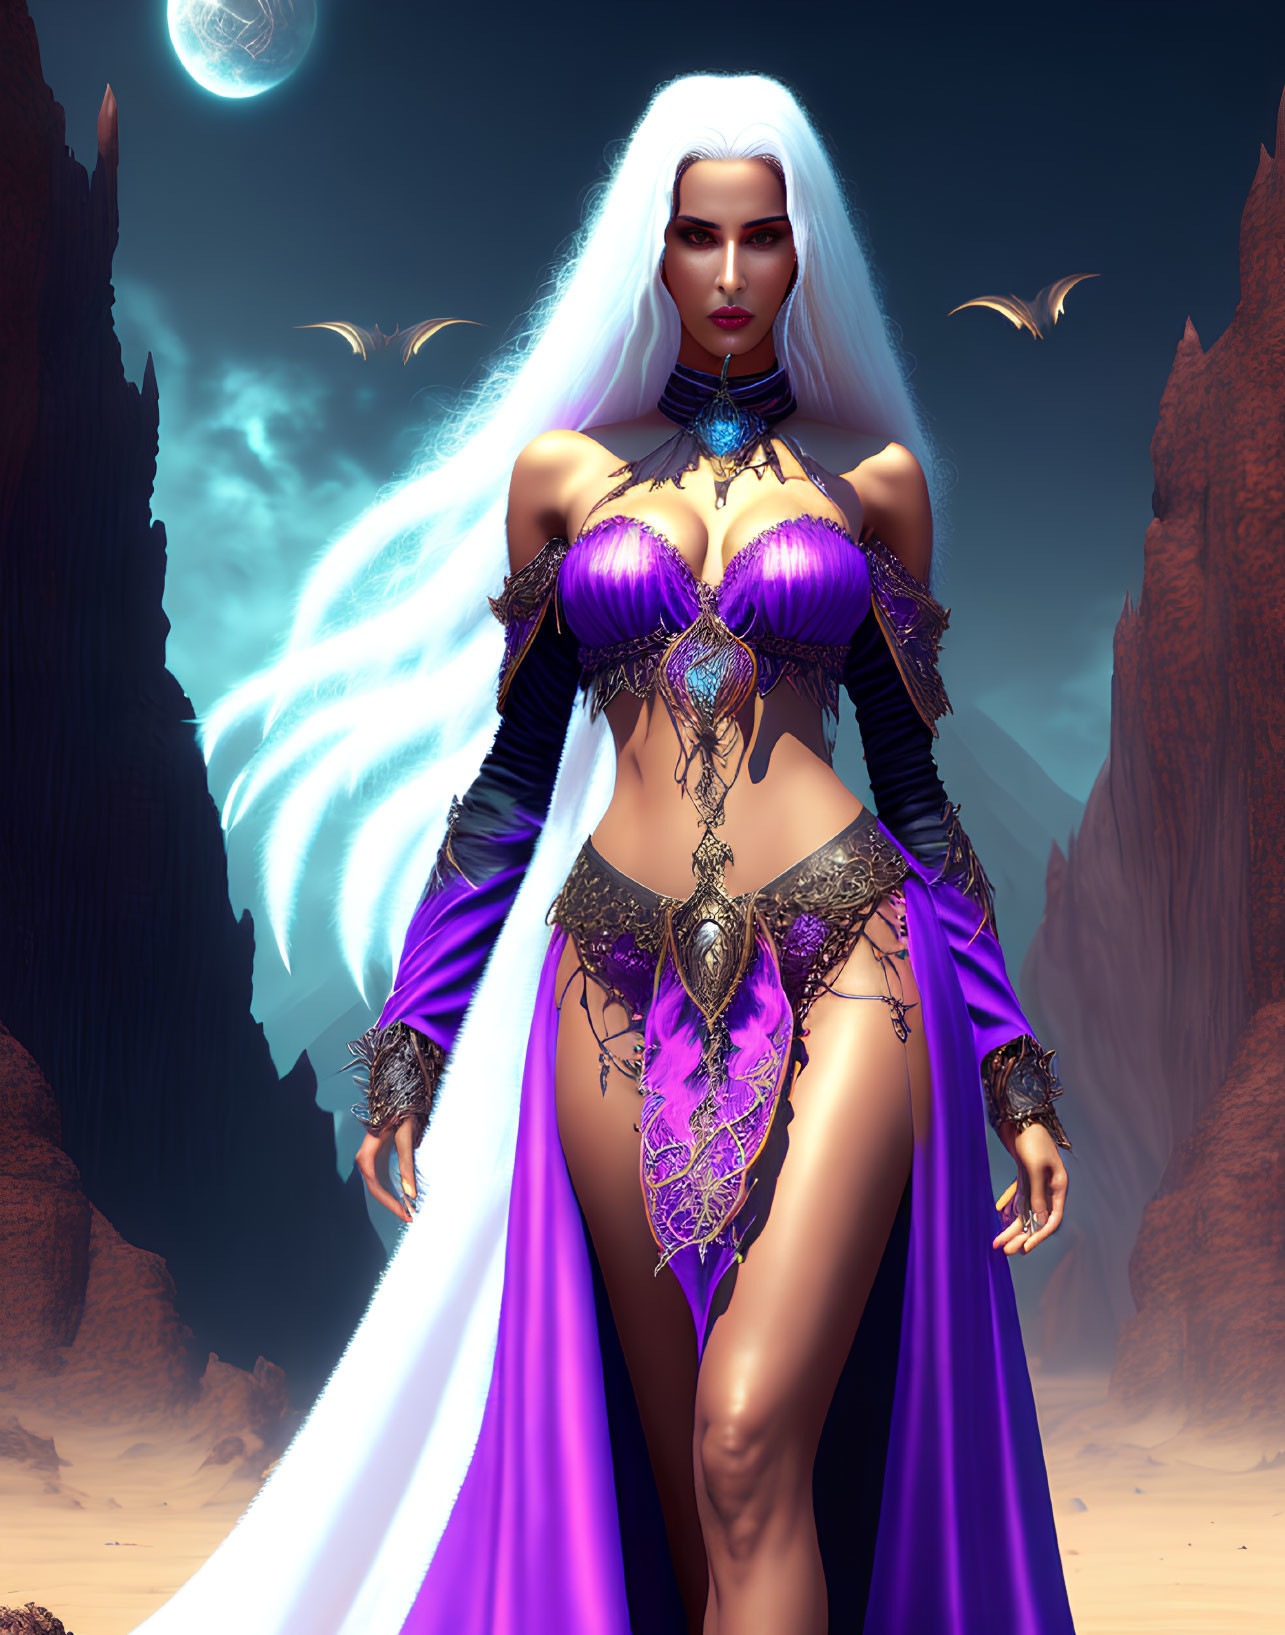 Fantasy image of woman in white hair, purple and gold attire in desert with two moons